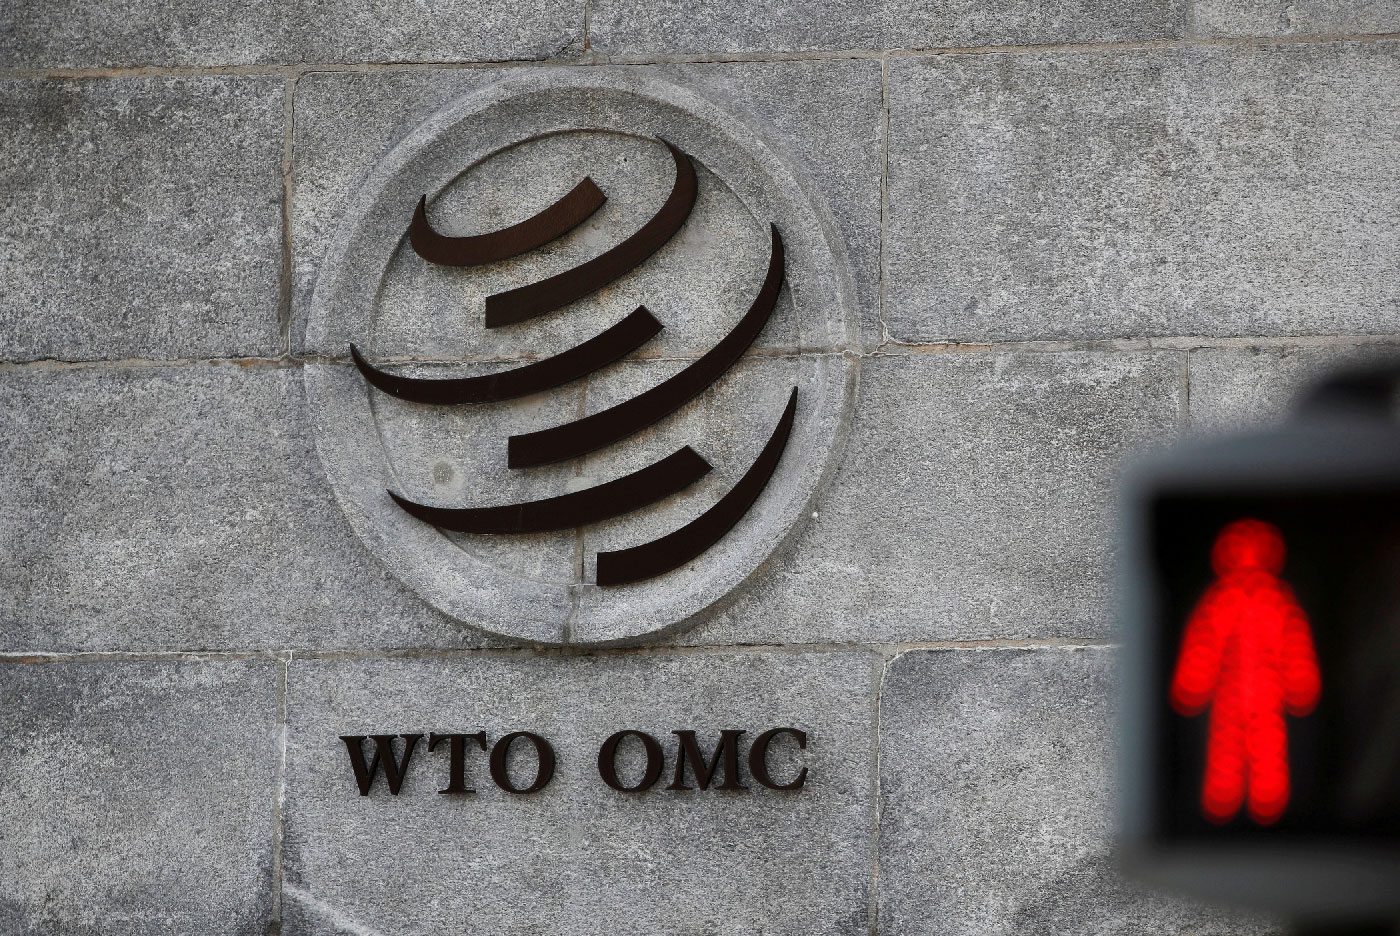 A logo is pictured outside the World Trade Organization (WTO) headquarters next to a red traffic light in Geneva, Switzerland, October 2, 2018. 